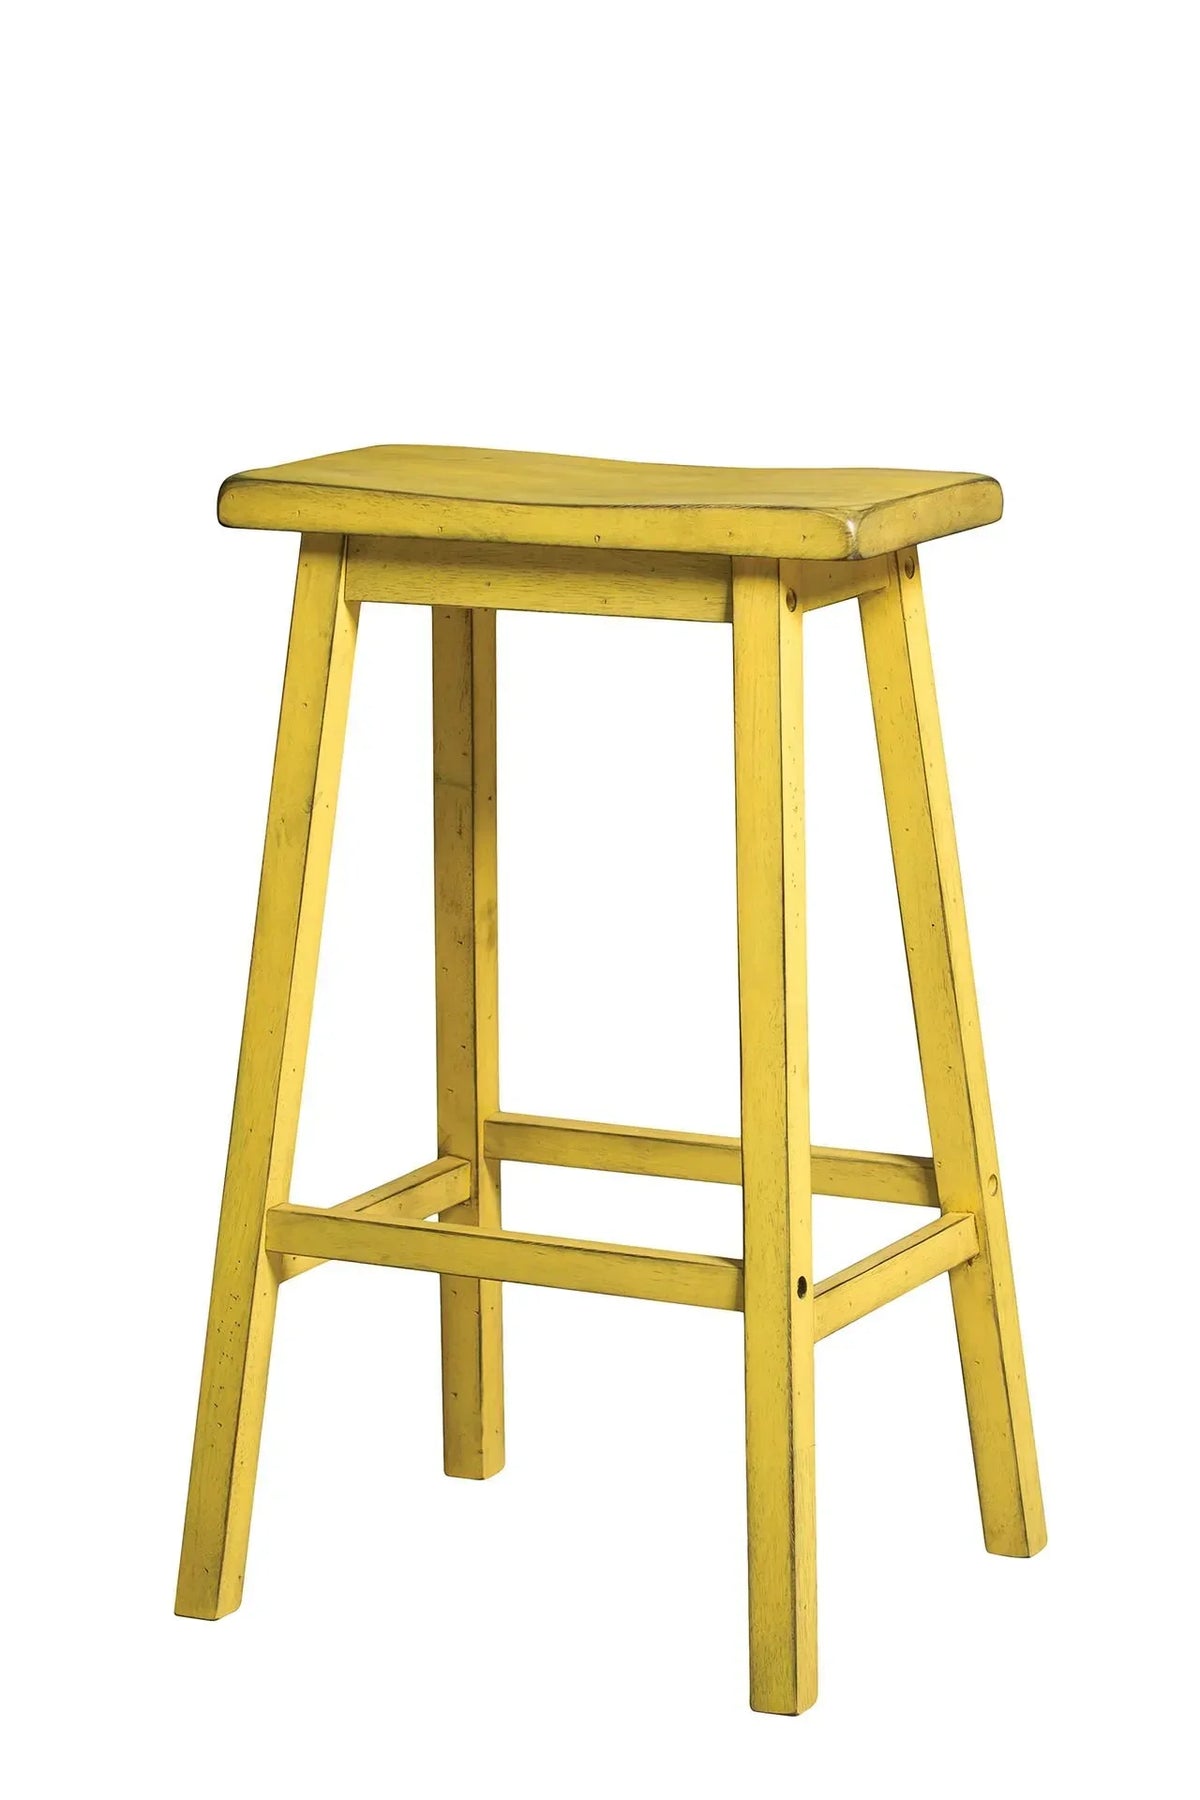 Gaucho Antique Yellow Bar Stool Model 96654 By ACME Furniture